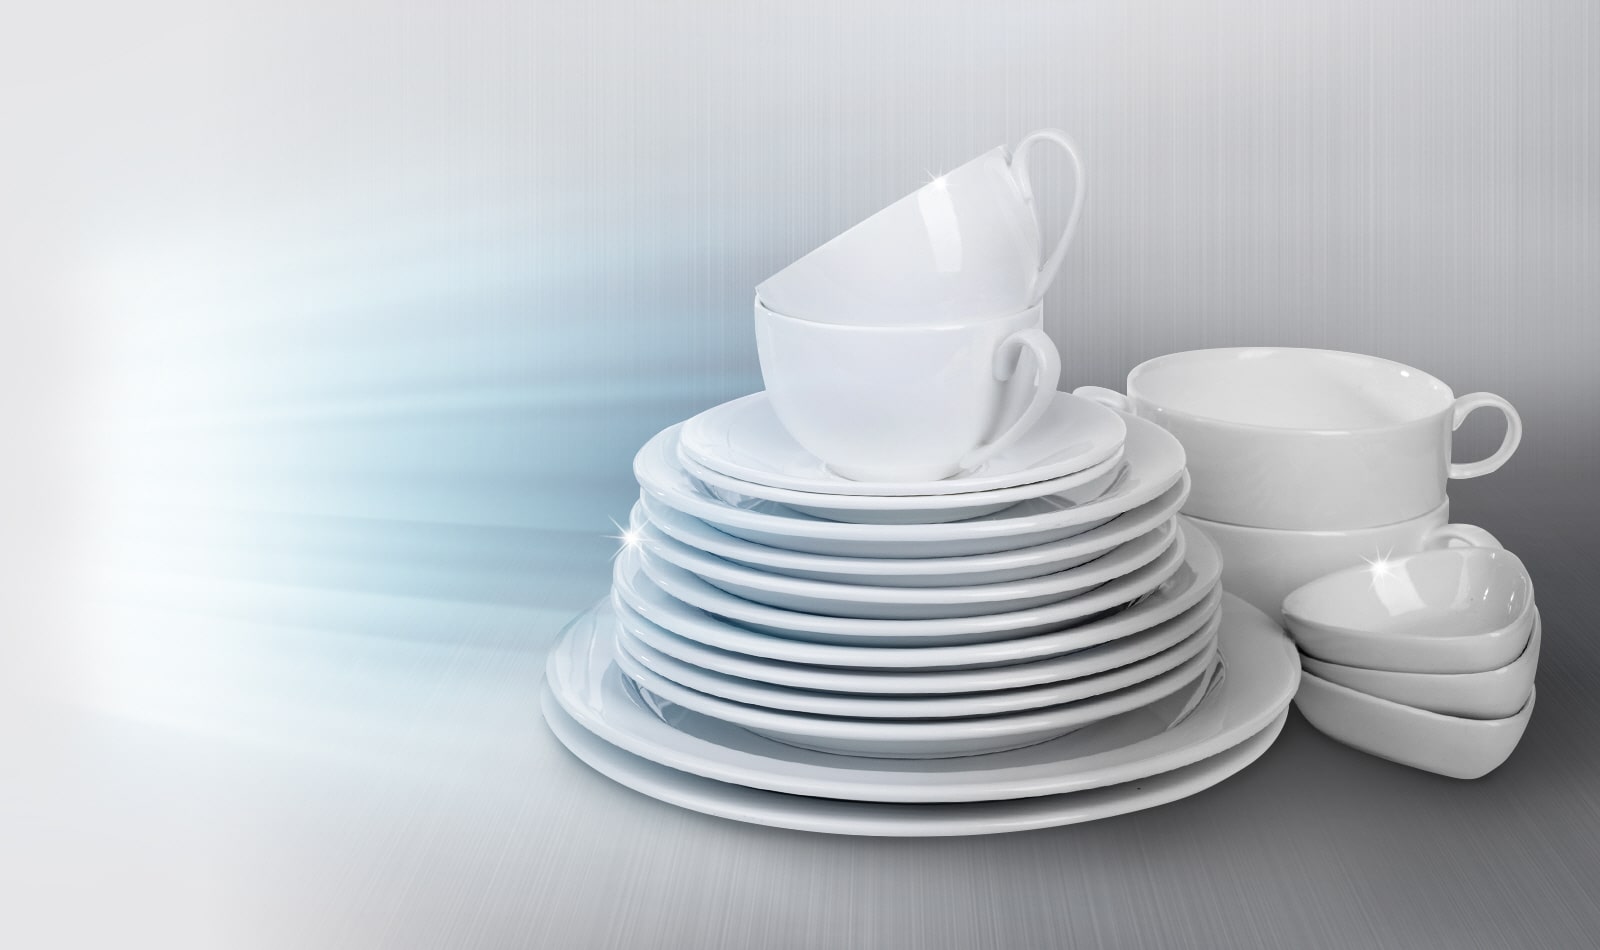 UV Sanitization Hygienic Dishes with No Bacteria